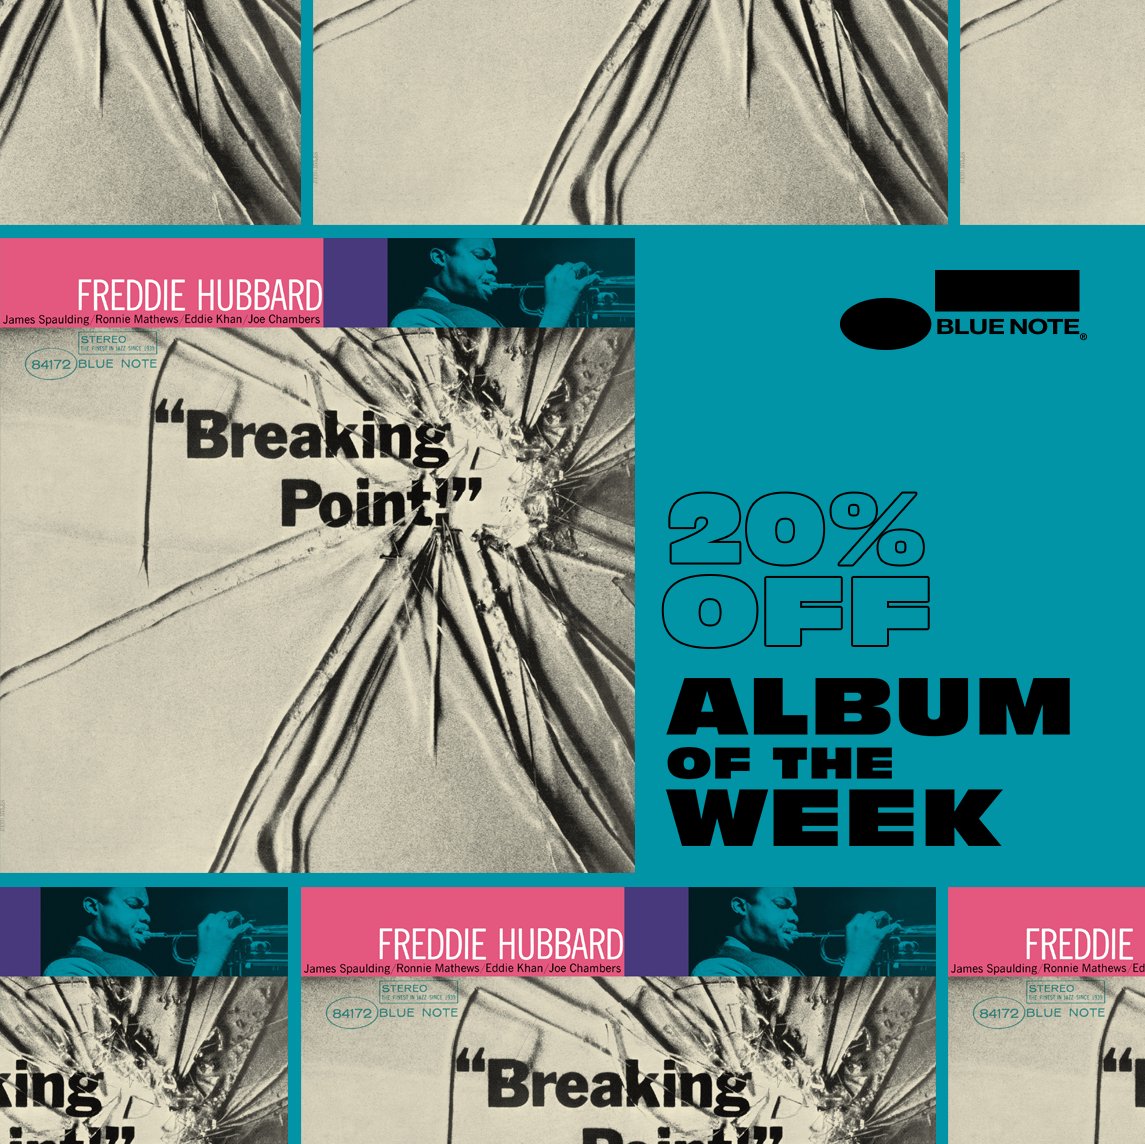 ALBUM OF THE WEEK :: Freddie Hubbard 'Breaking Point!' :: Get the Tone Poet Vinyl Edition 20% off bluenote.lnk.to/AlbumOfTheWeek This remarkable 1964 album, which marks its 60th anniversary this week, moves assuredly from free-form playing & modal jazz to the blues & balladry.